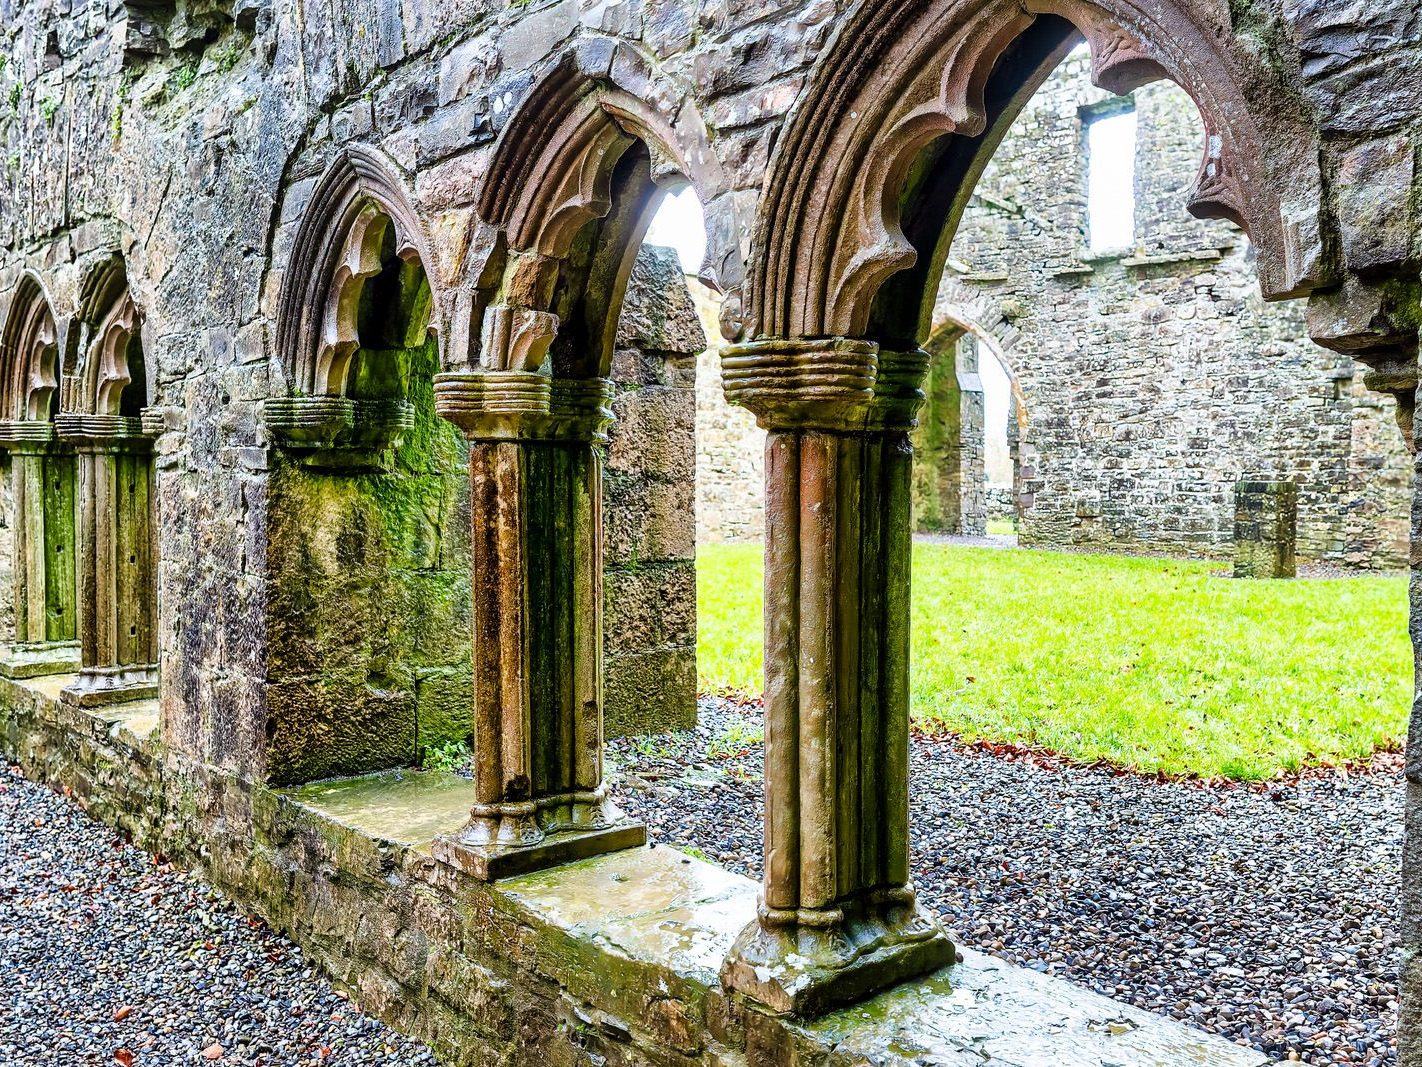 BECTIVE ABBEY WHICH I VISITED LAST CHRISTMAS [THERE WERE NO OTHER VISITORS AS IT WAS A VERY WET DAY]--225228-1